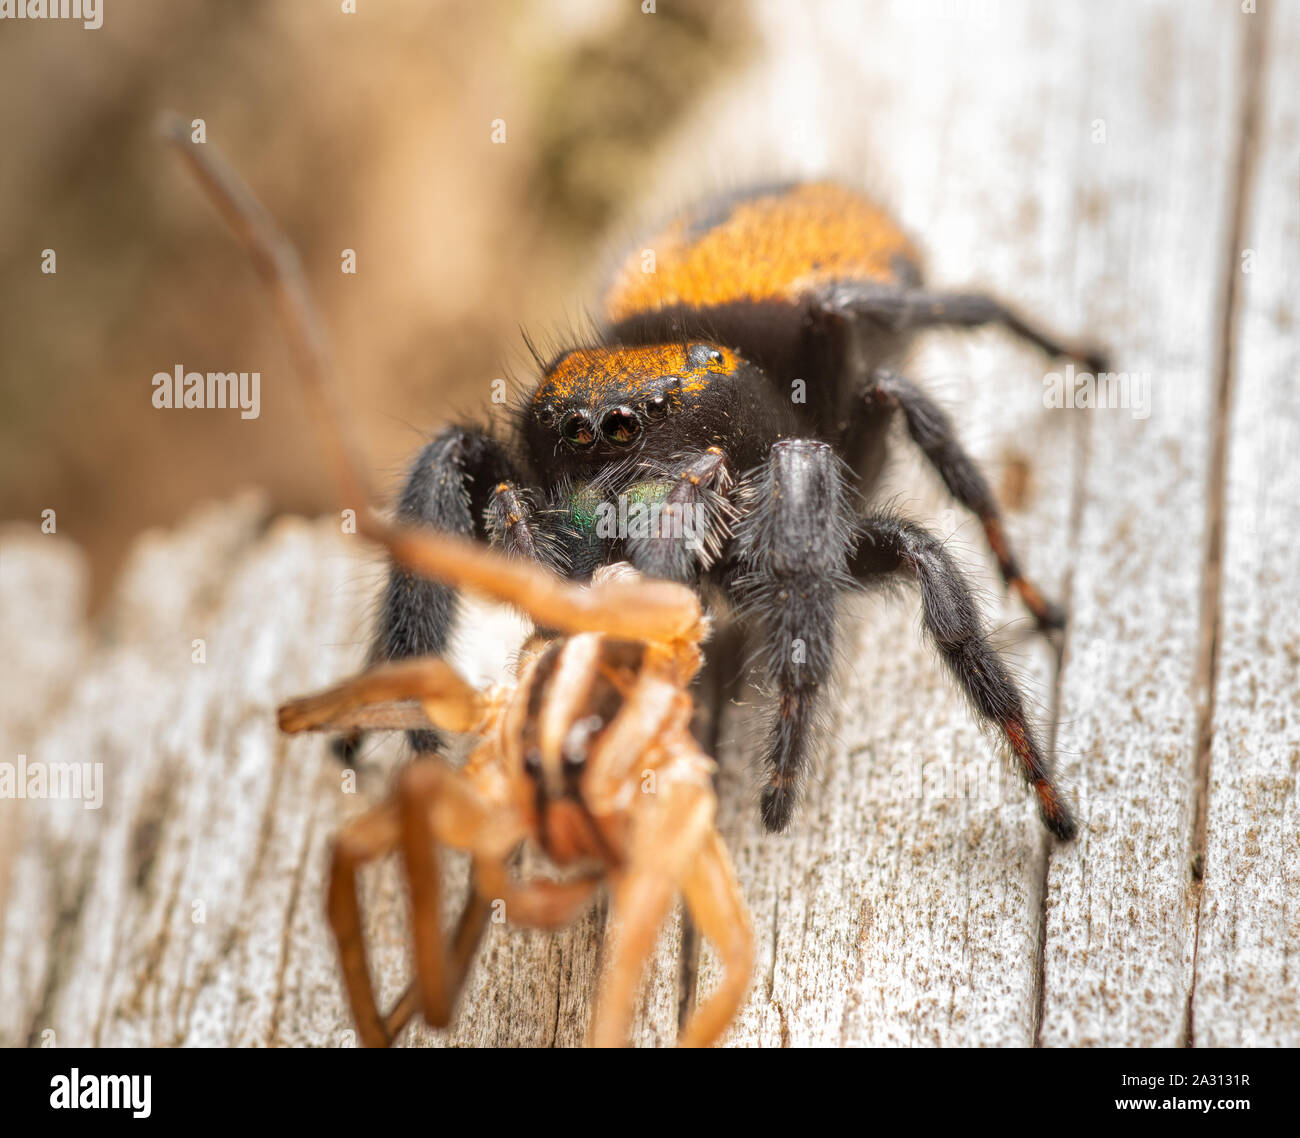 Female Apache jumping spider, Phidippus apacheanus, eating a large wolf spider on the side of a wooden fence post Stock Photo